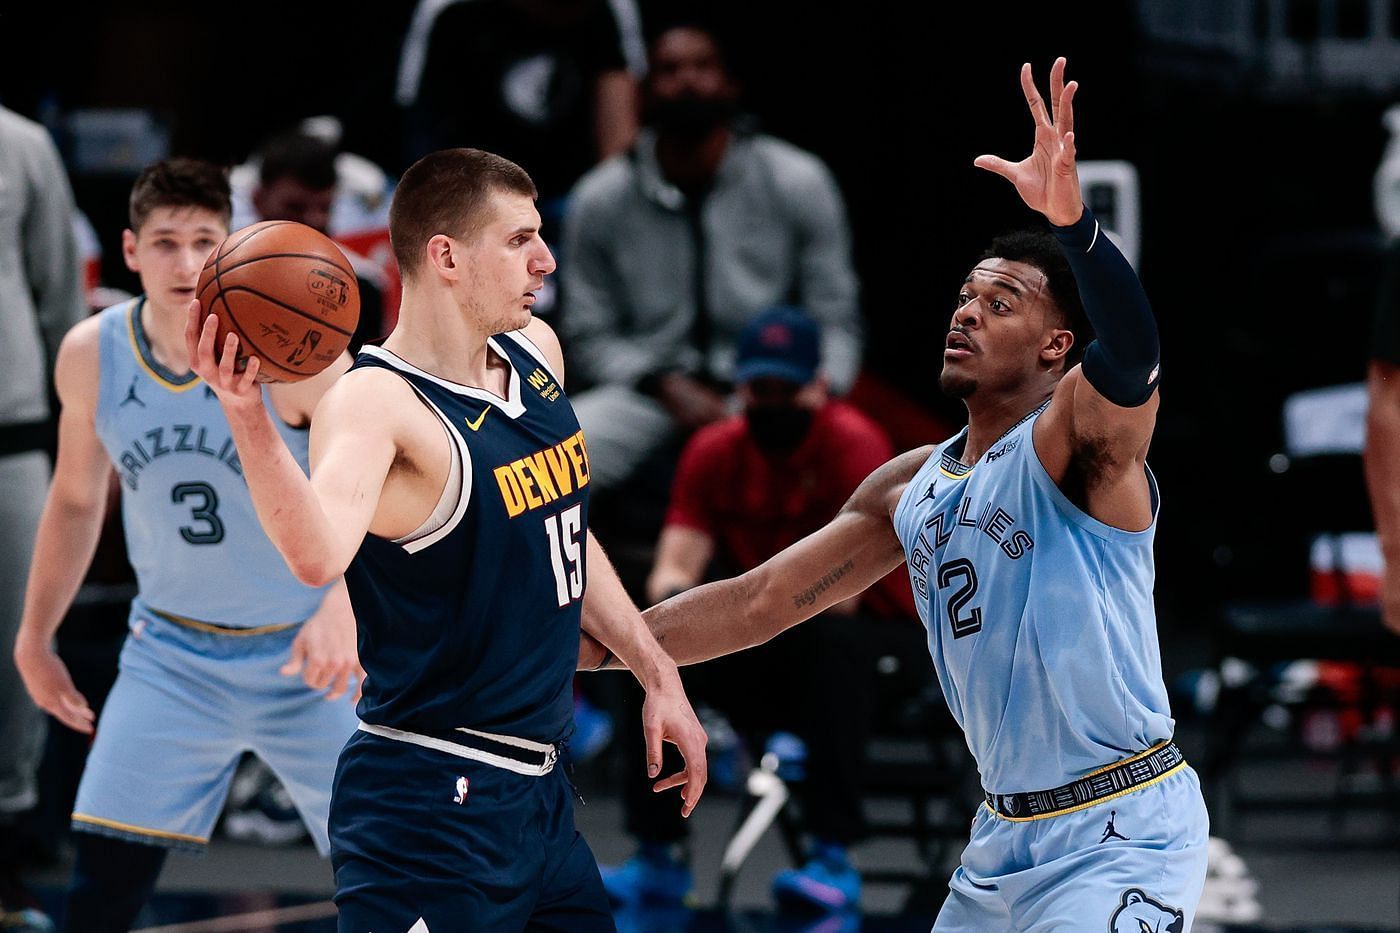 Nikola Jokic of the Denver Nuggets against the Memphis Grizzlies [Source: USA Today]